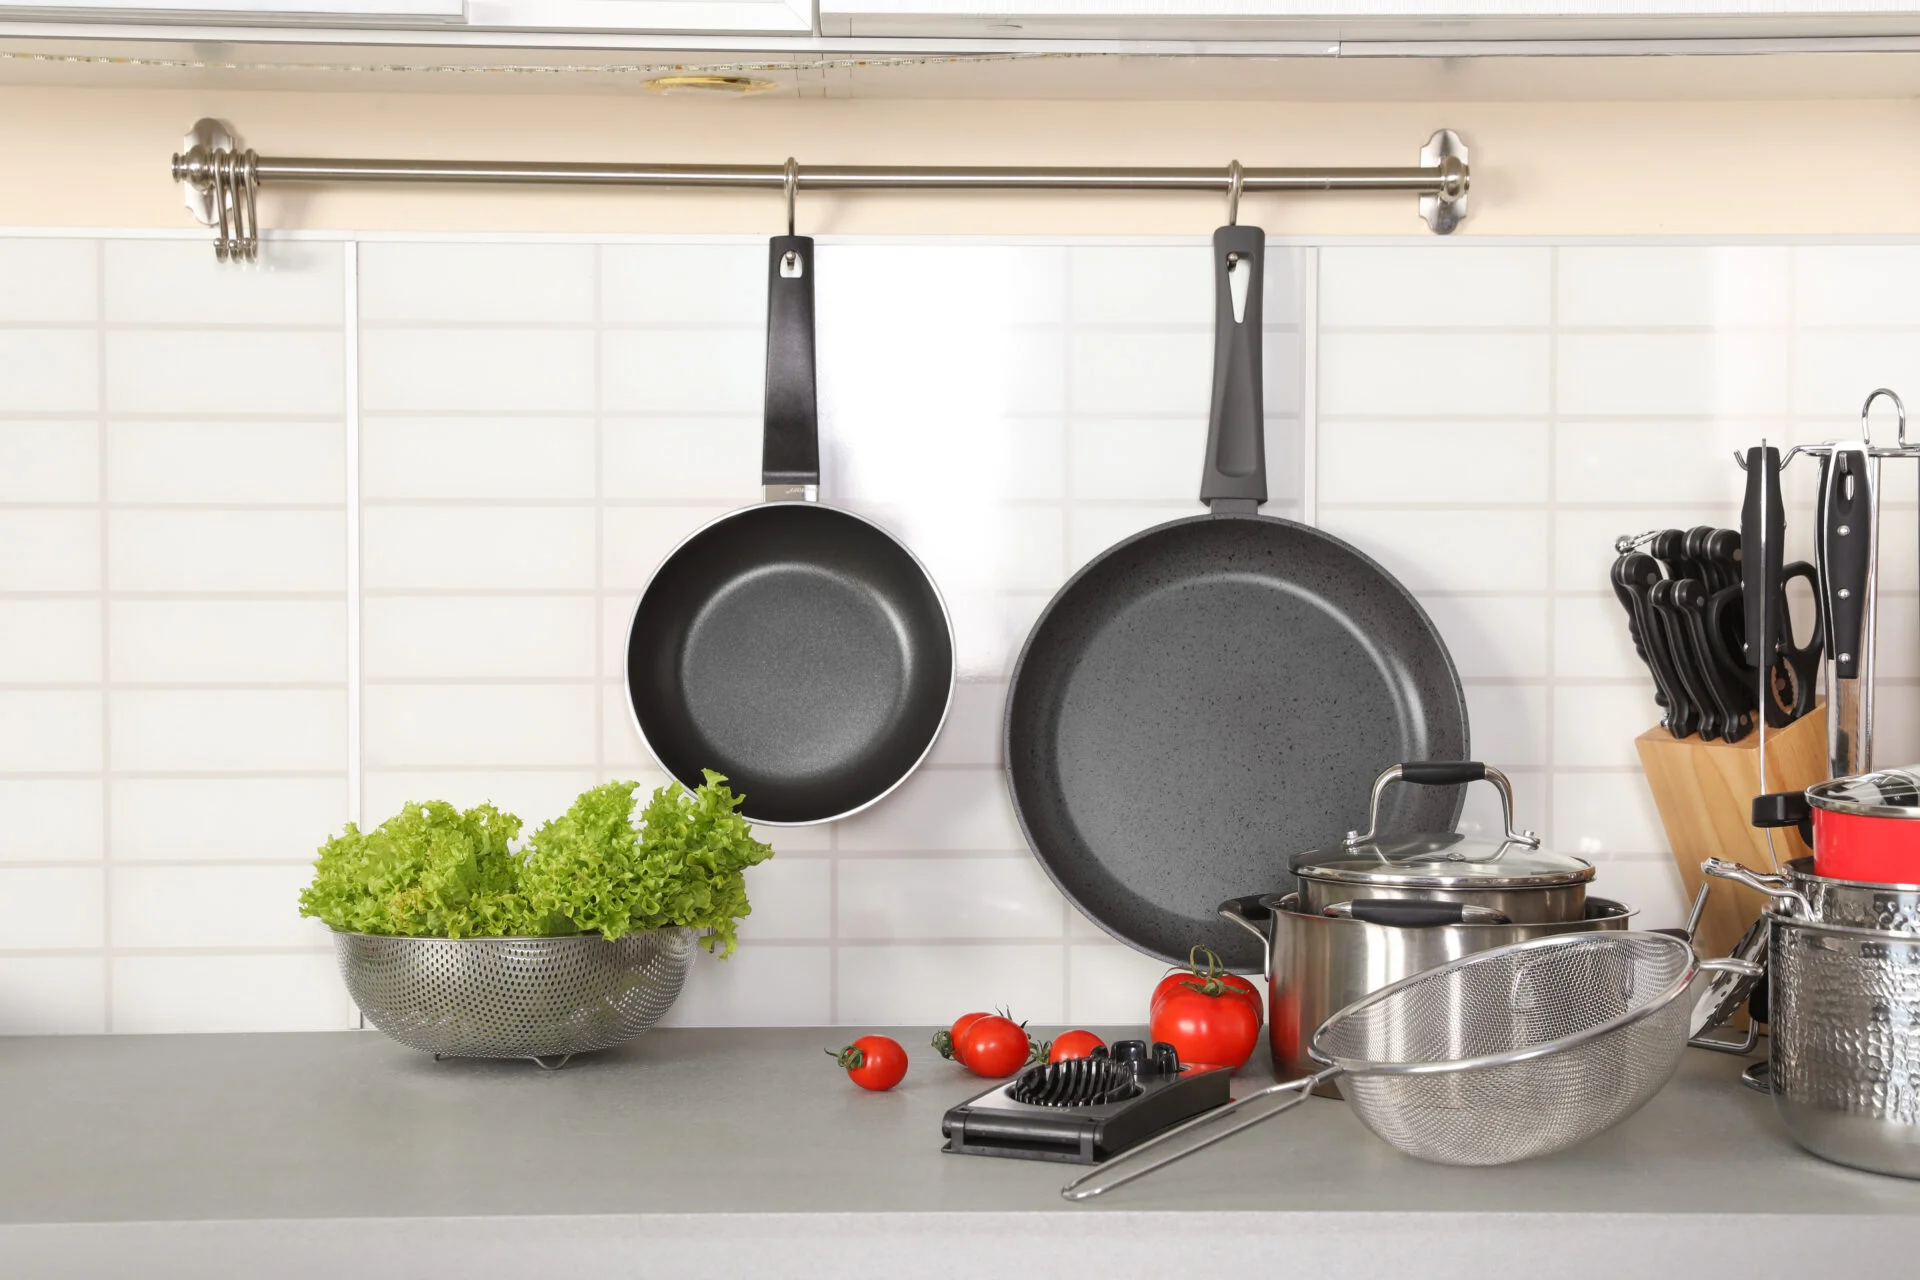 Set of clean cookware, utensils and products on table in modern kitchen